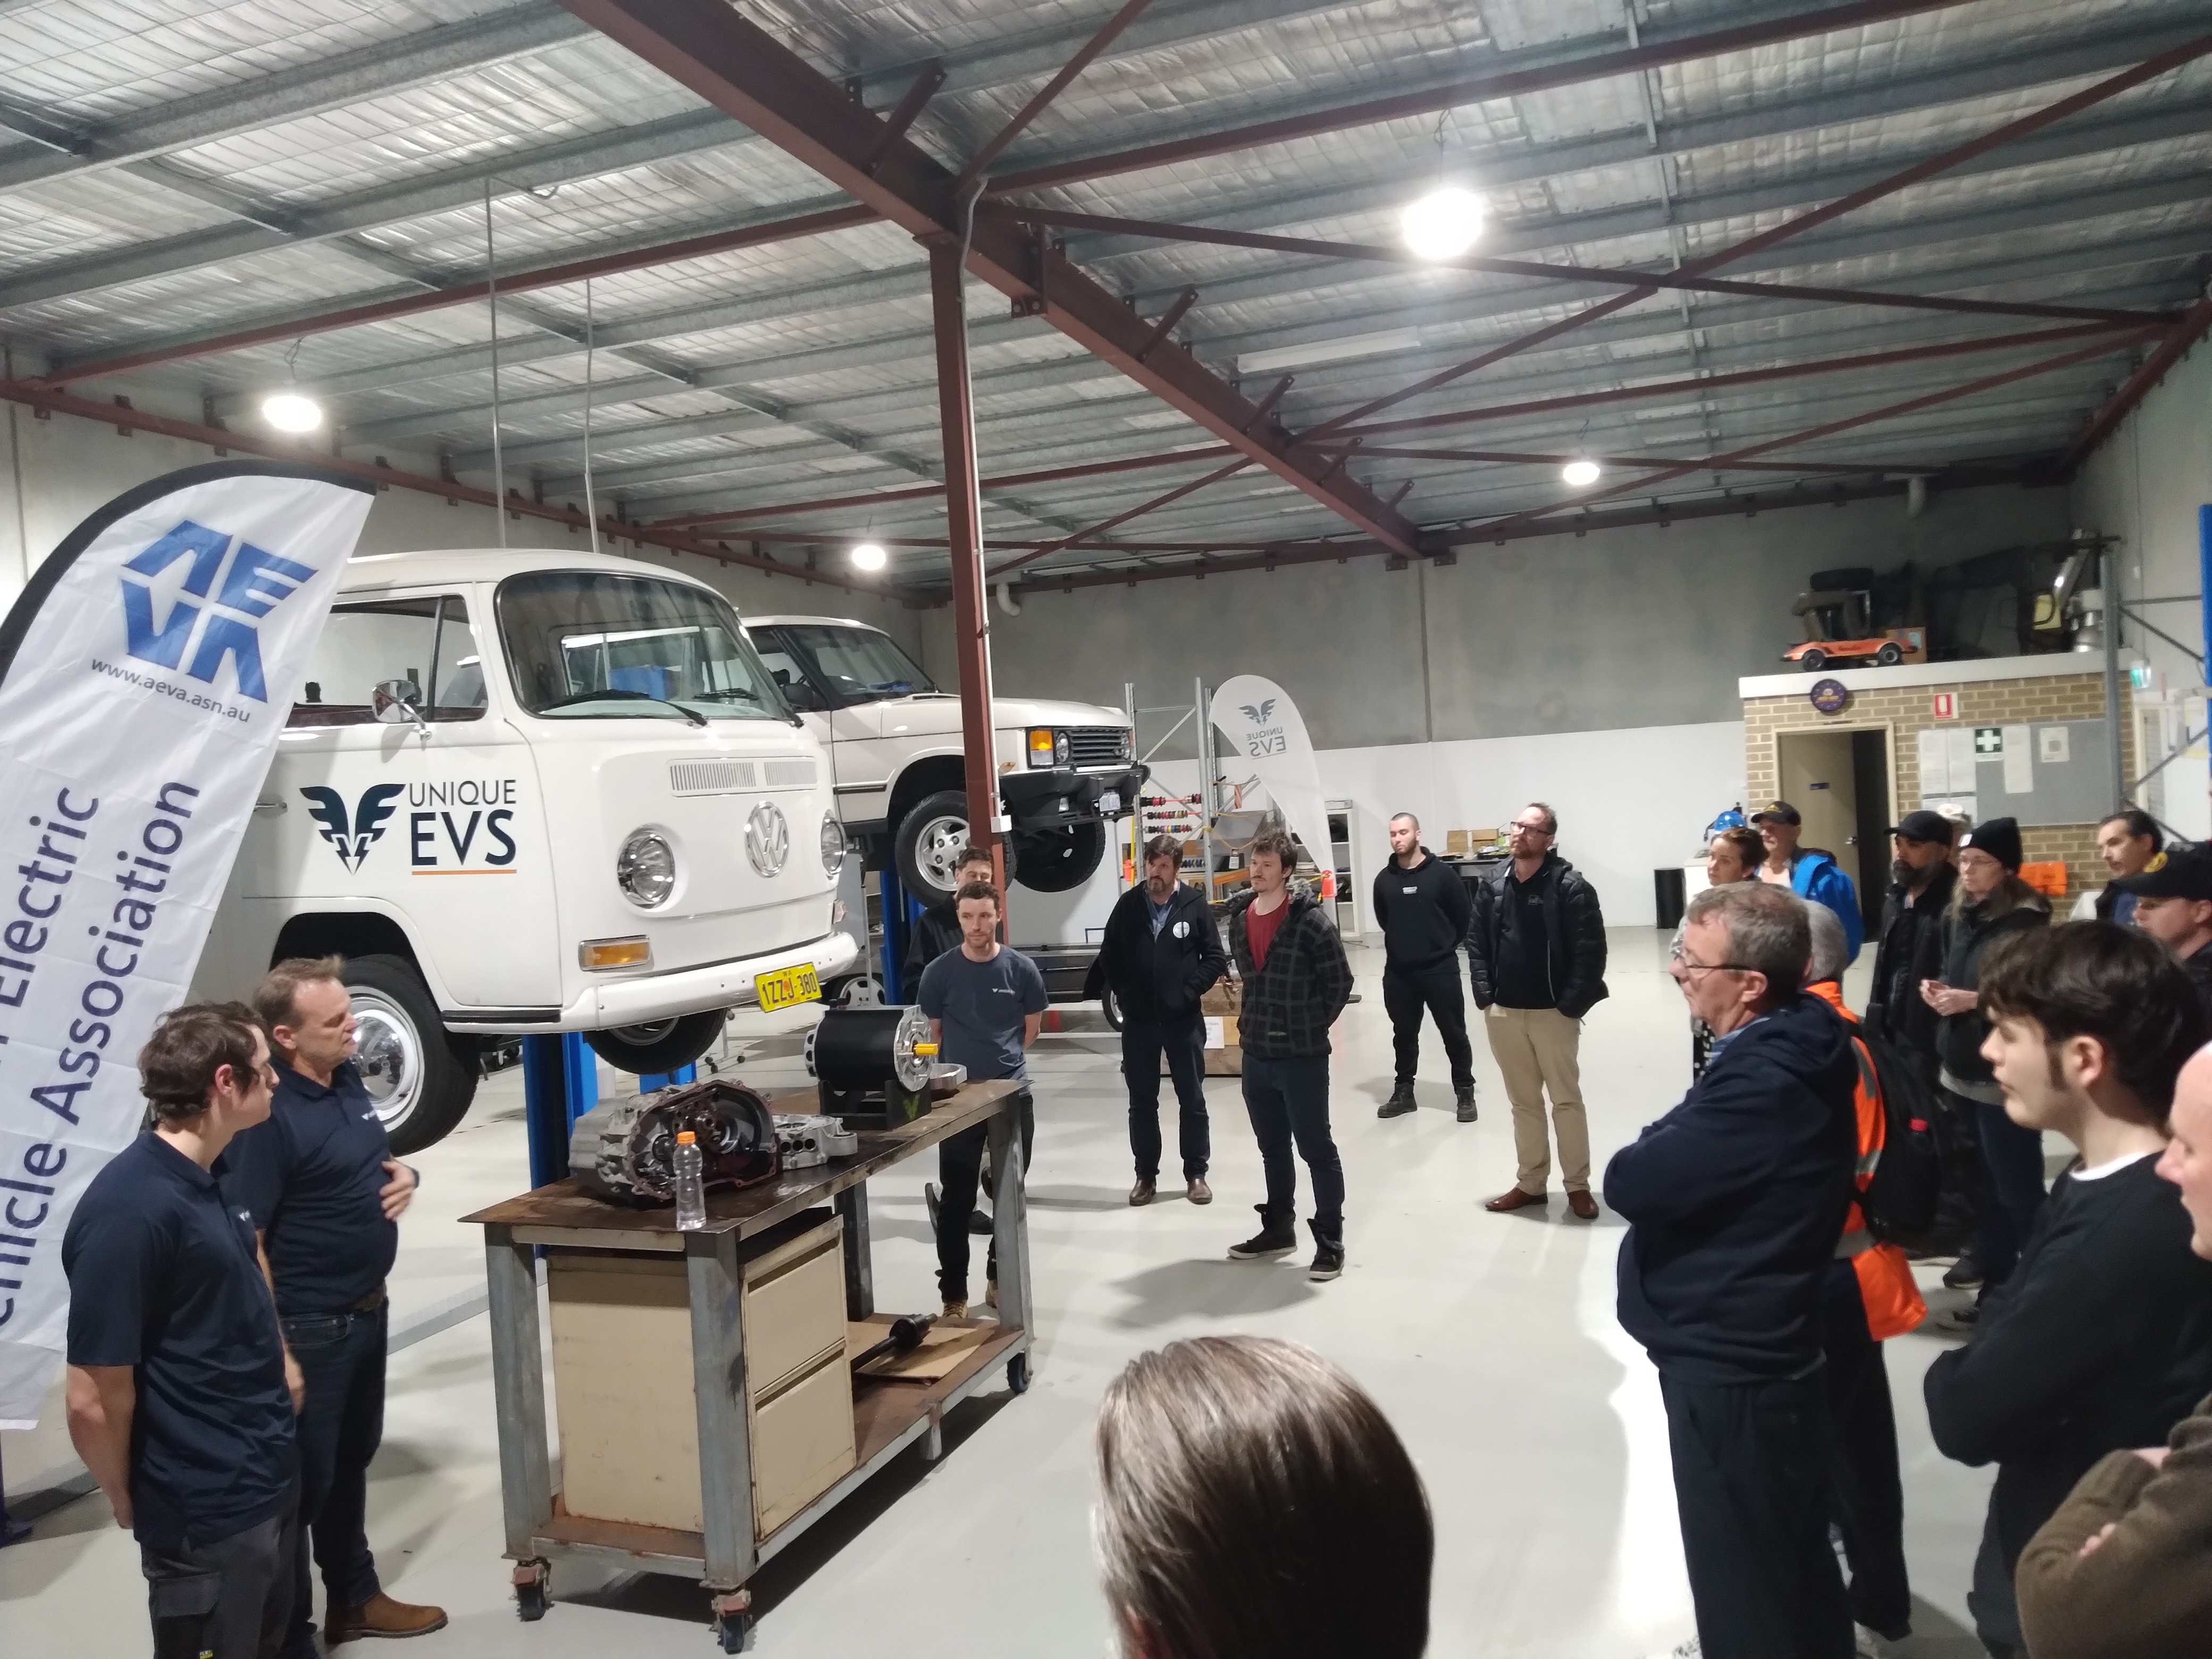 Cam and the team at Unique EVs showed the group some of their recent projects